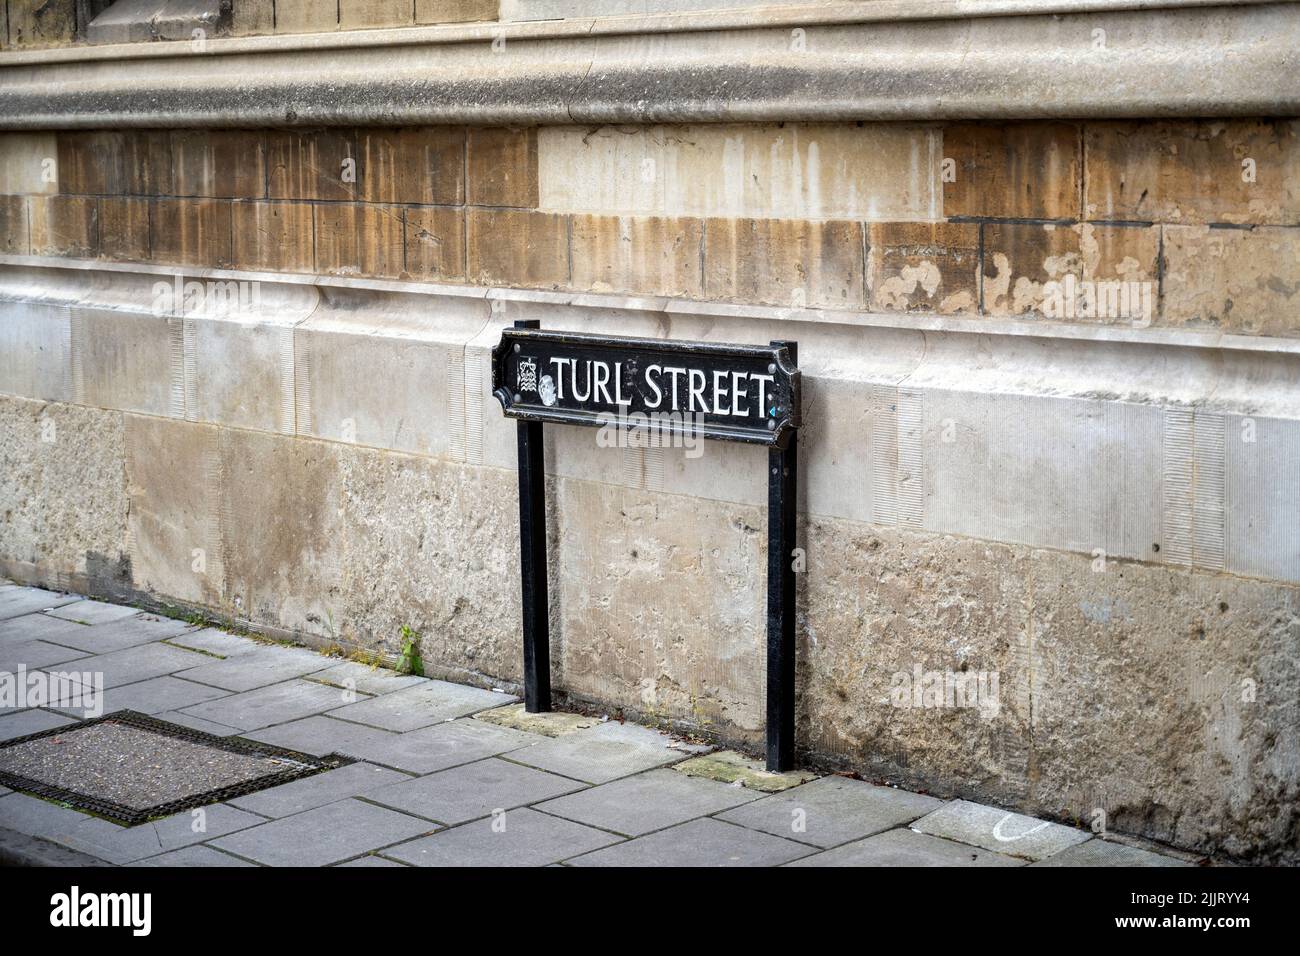 Turl street Oxford. street sign road sign Oxford England Stock Photo